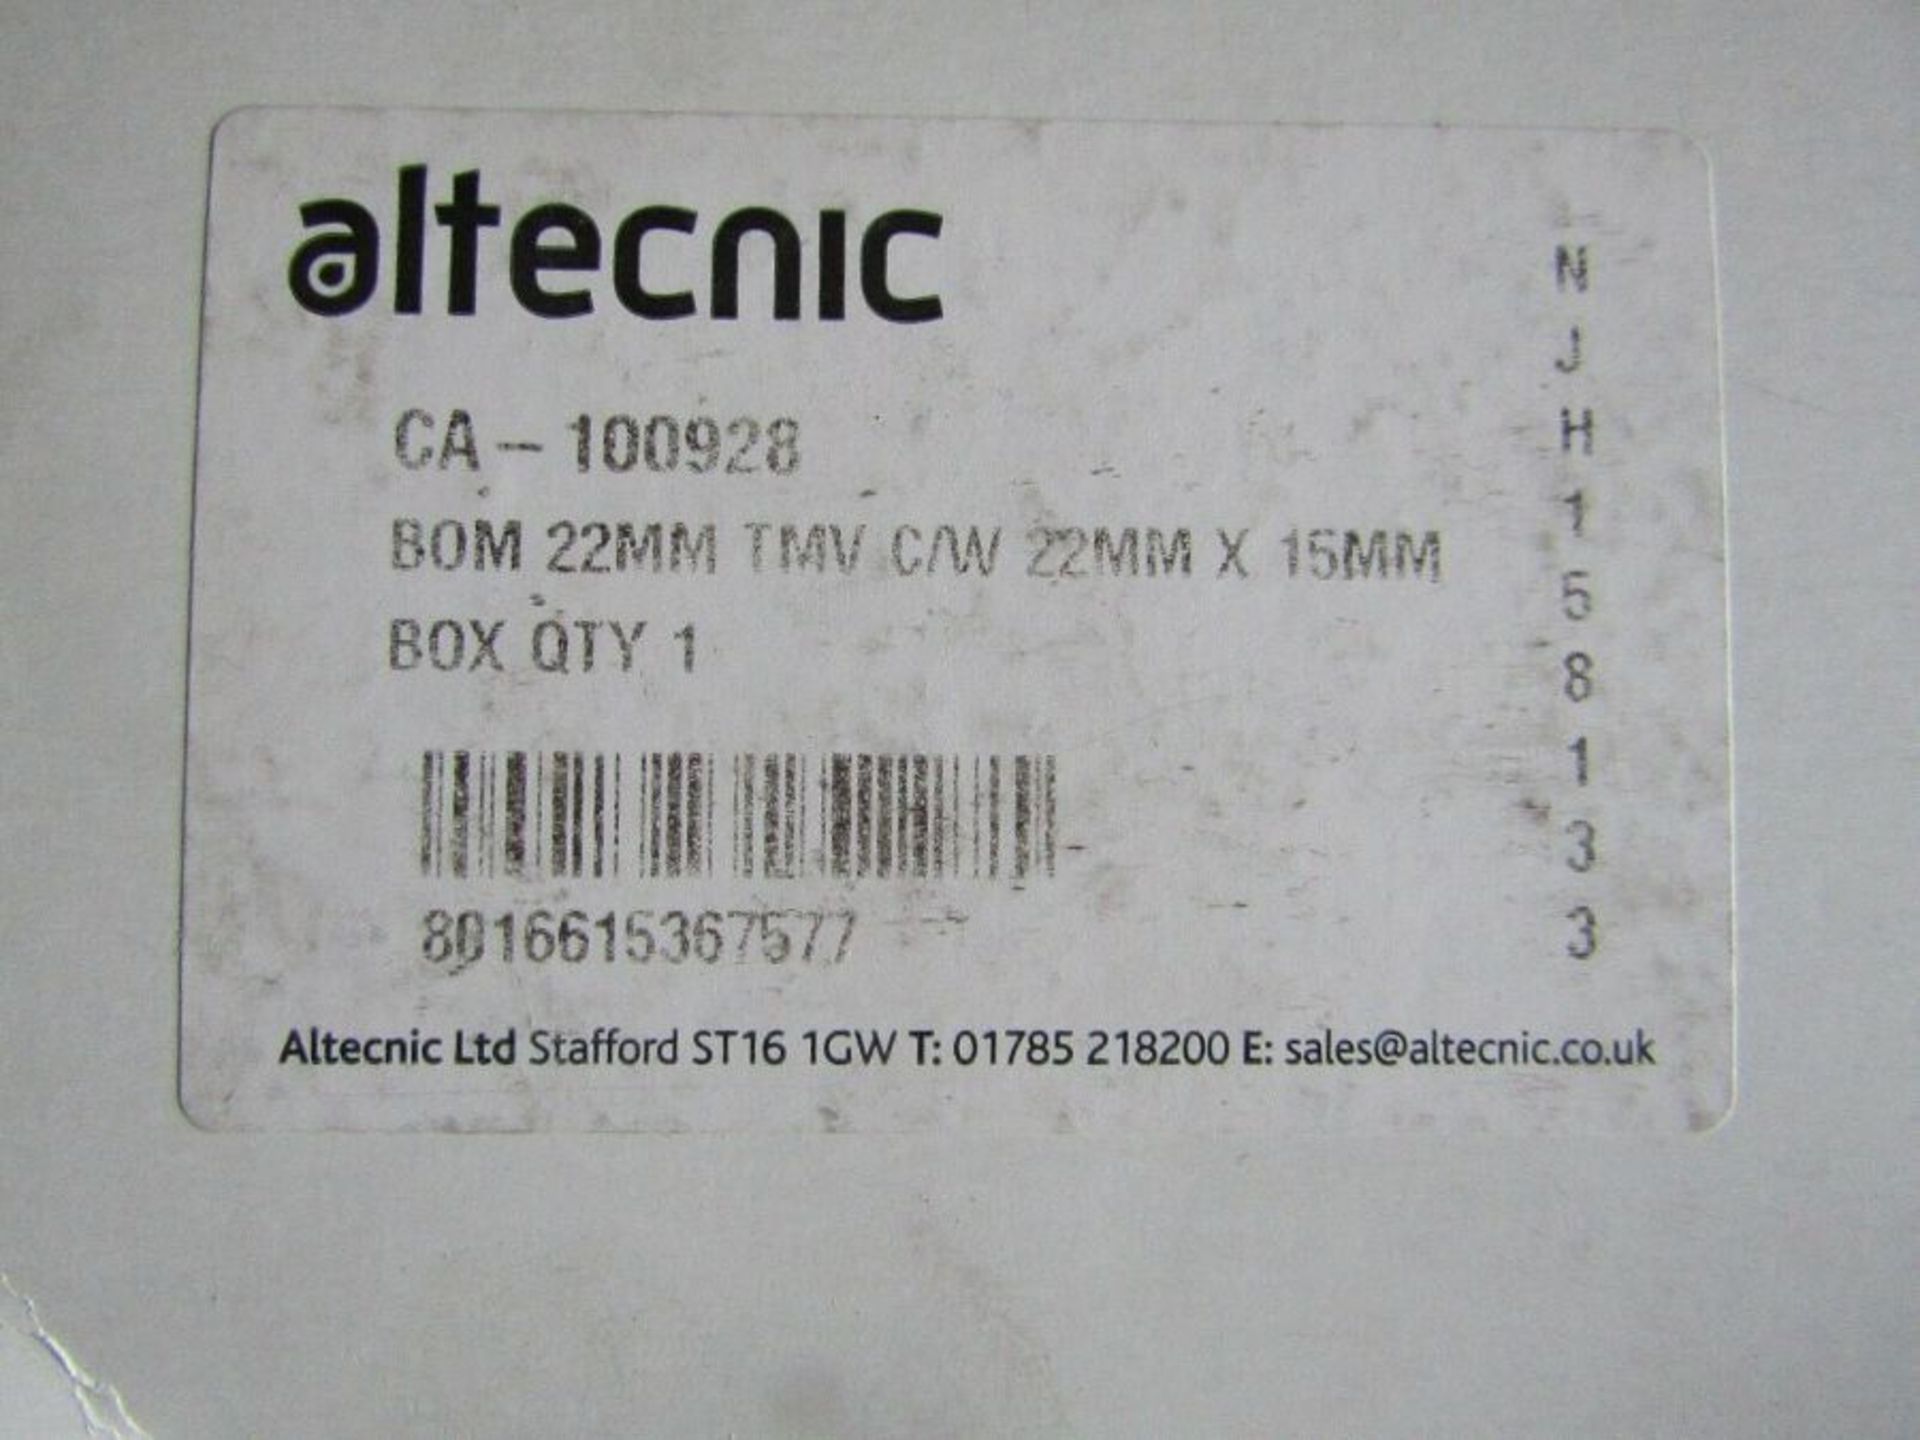 30 x Altecnic Brass Thermostatic Washroom Mixing Valve 22mm Compression H9554 7770368 - Image 2 of 4